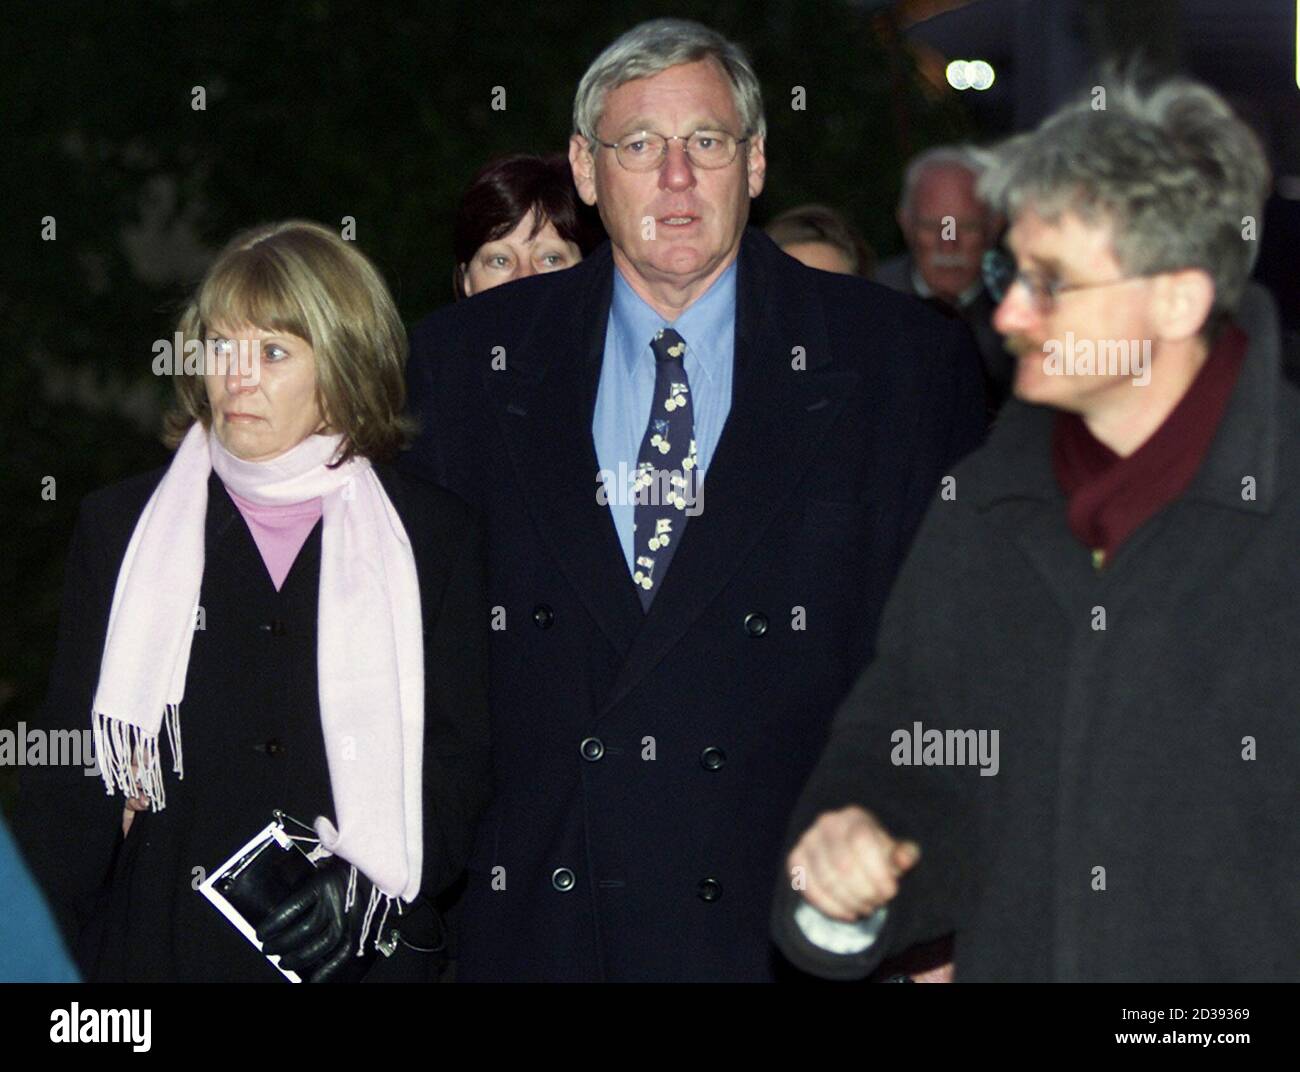 PARENTS FROM AUSTRALIA ARRIVE FOR PRONOUNCING OF JUDGEMENTS AGAINST MEMBERS OF WILDWATER ADVENTURE COMPANY IN INTERLAKEN.   Bronwyn (L) and Paul Scott Smith (R) from Australia, who lost her daughter Briana in the canyoning disaster in summer 1999, arrive together with lawyer Eric Blindenbacher (R) for the pronouncing of judgements in Interlaken December 12, 2001. The court was due to hand down verdicts in manslaughter trial against eight members of the Swiss company that organised a disastrous wildwater adventure in which 18 thrill-seekers and three guides died. REUTERS/Marcus Gyger REUTERS Stock Photo